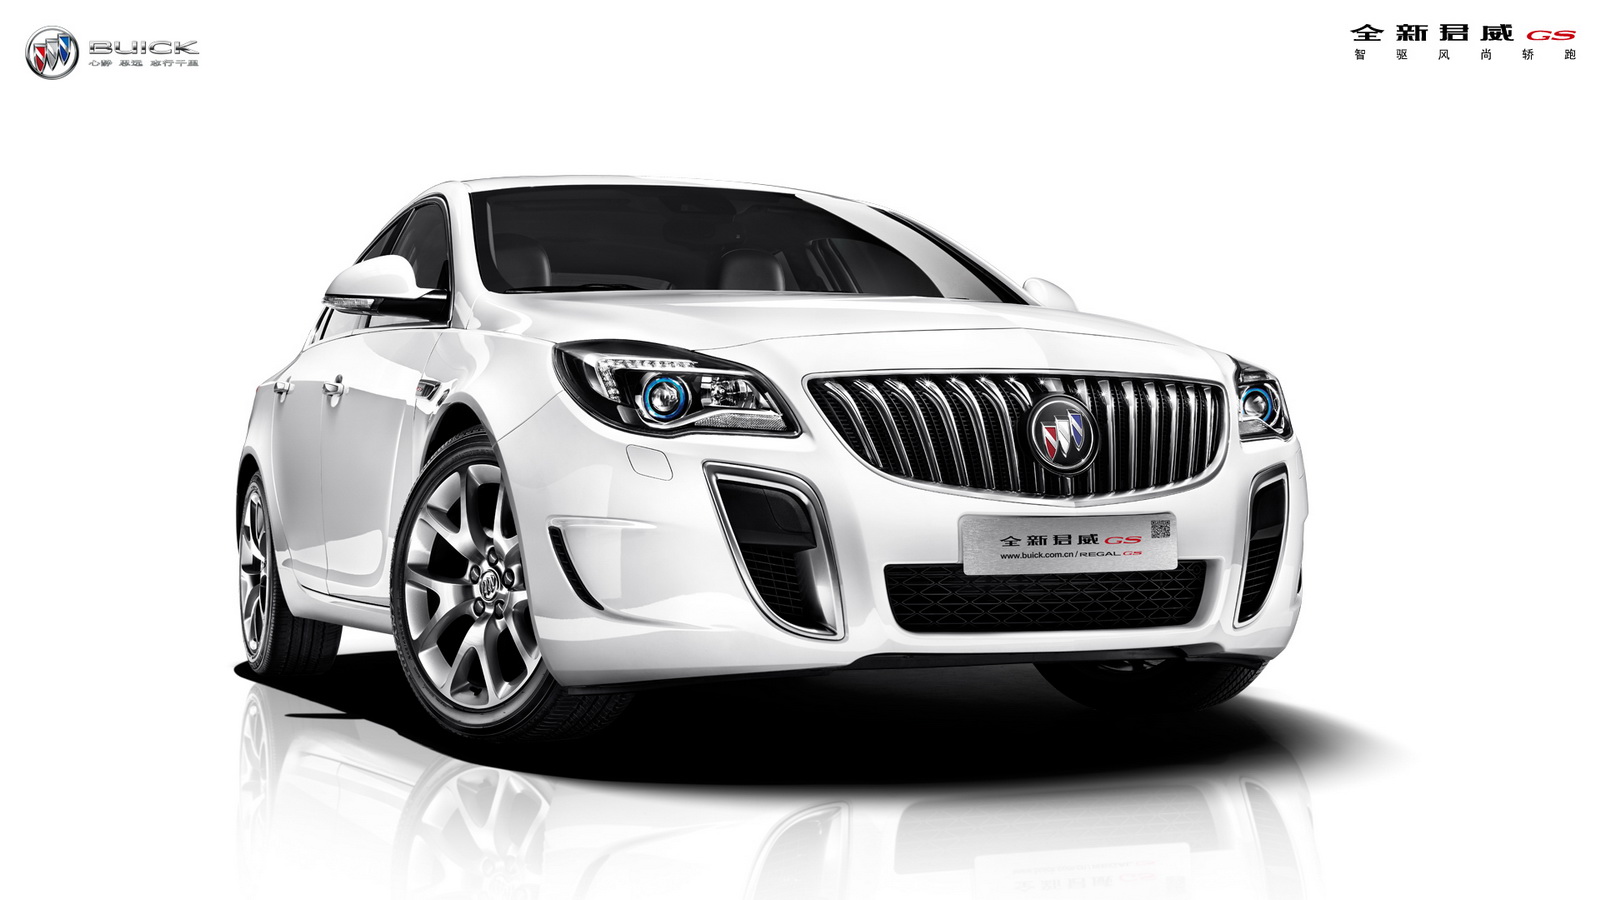 New Buick Regal Gets Standard Active-Hood In China To Protect Pedestrians | Carscoops1600 x 900